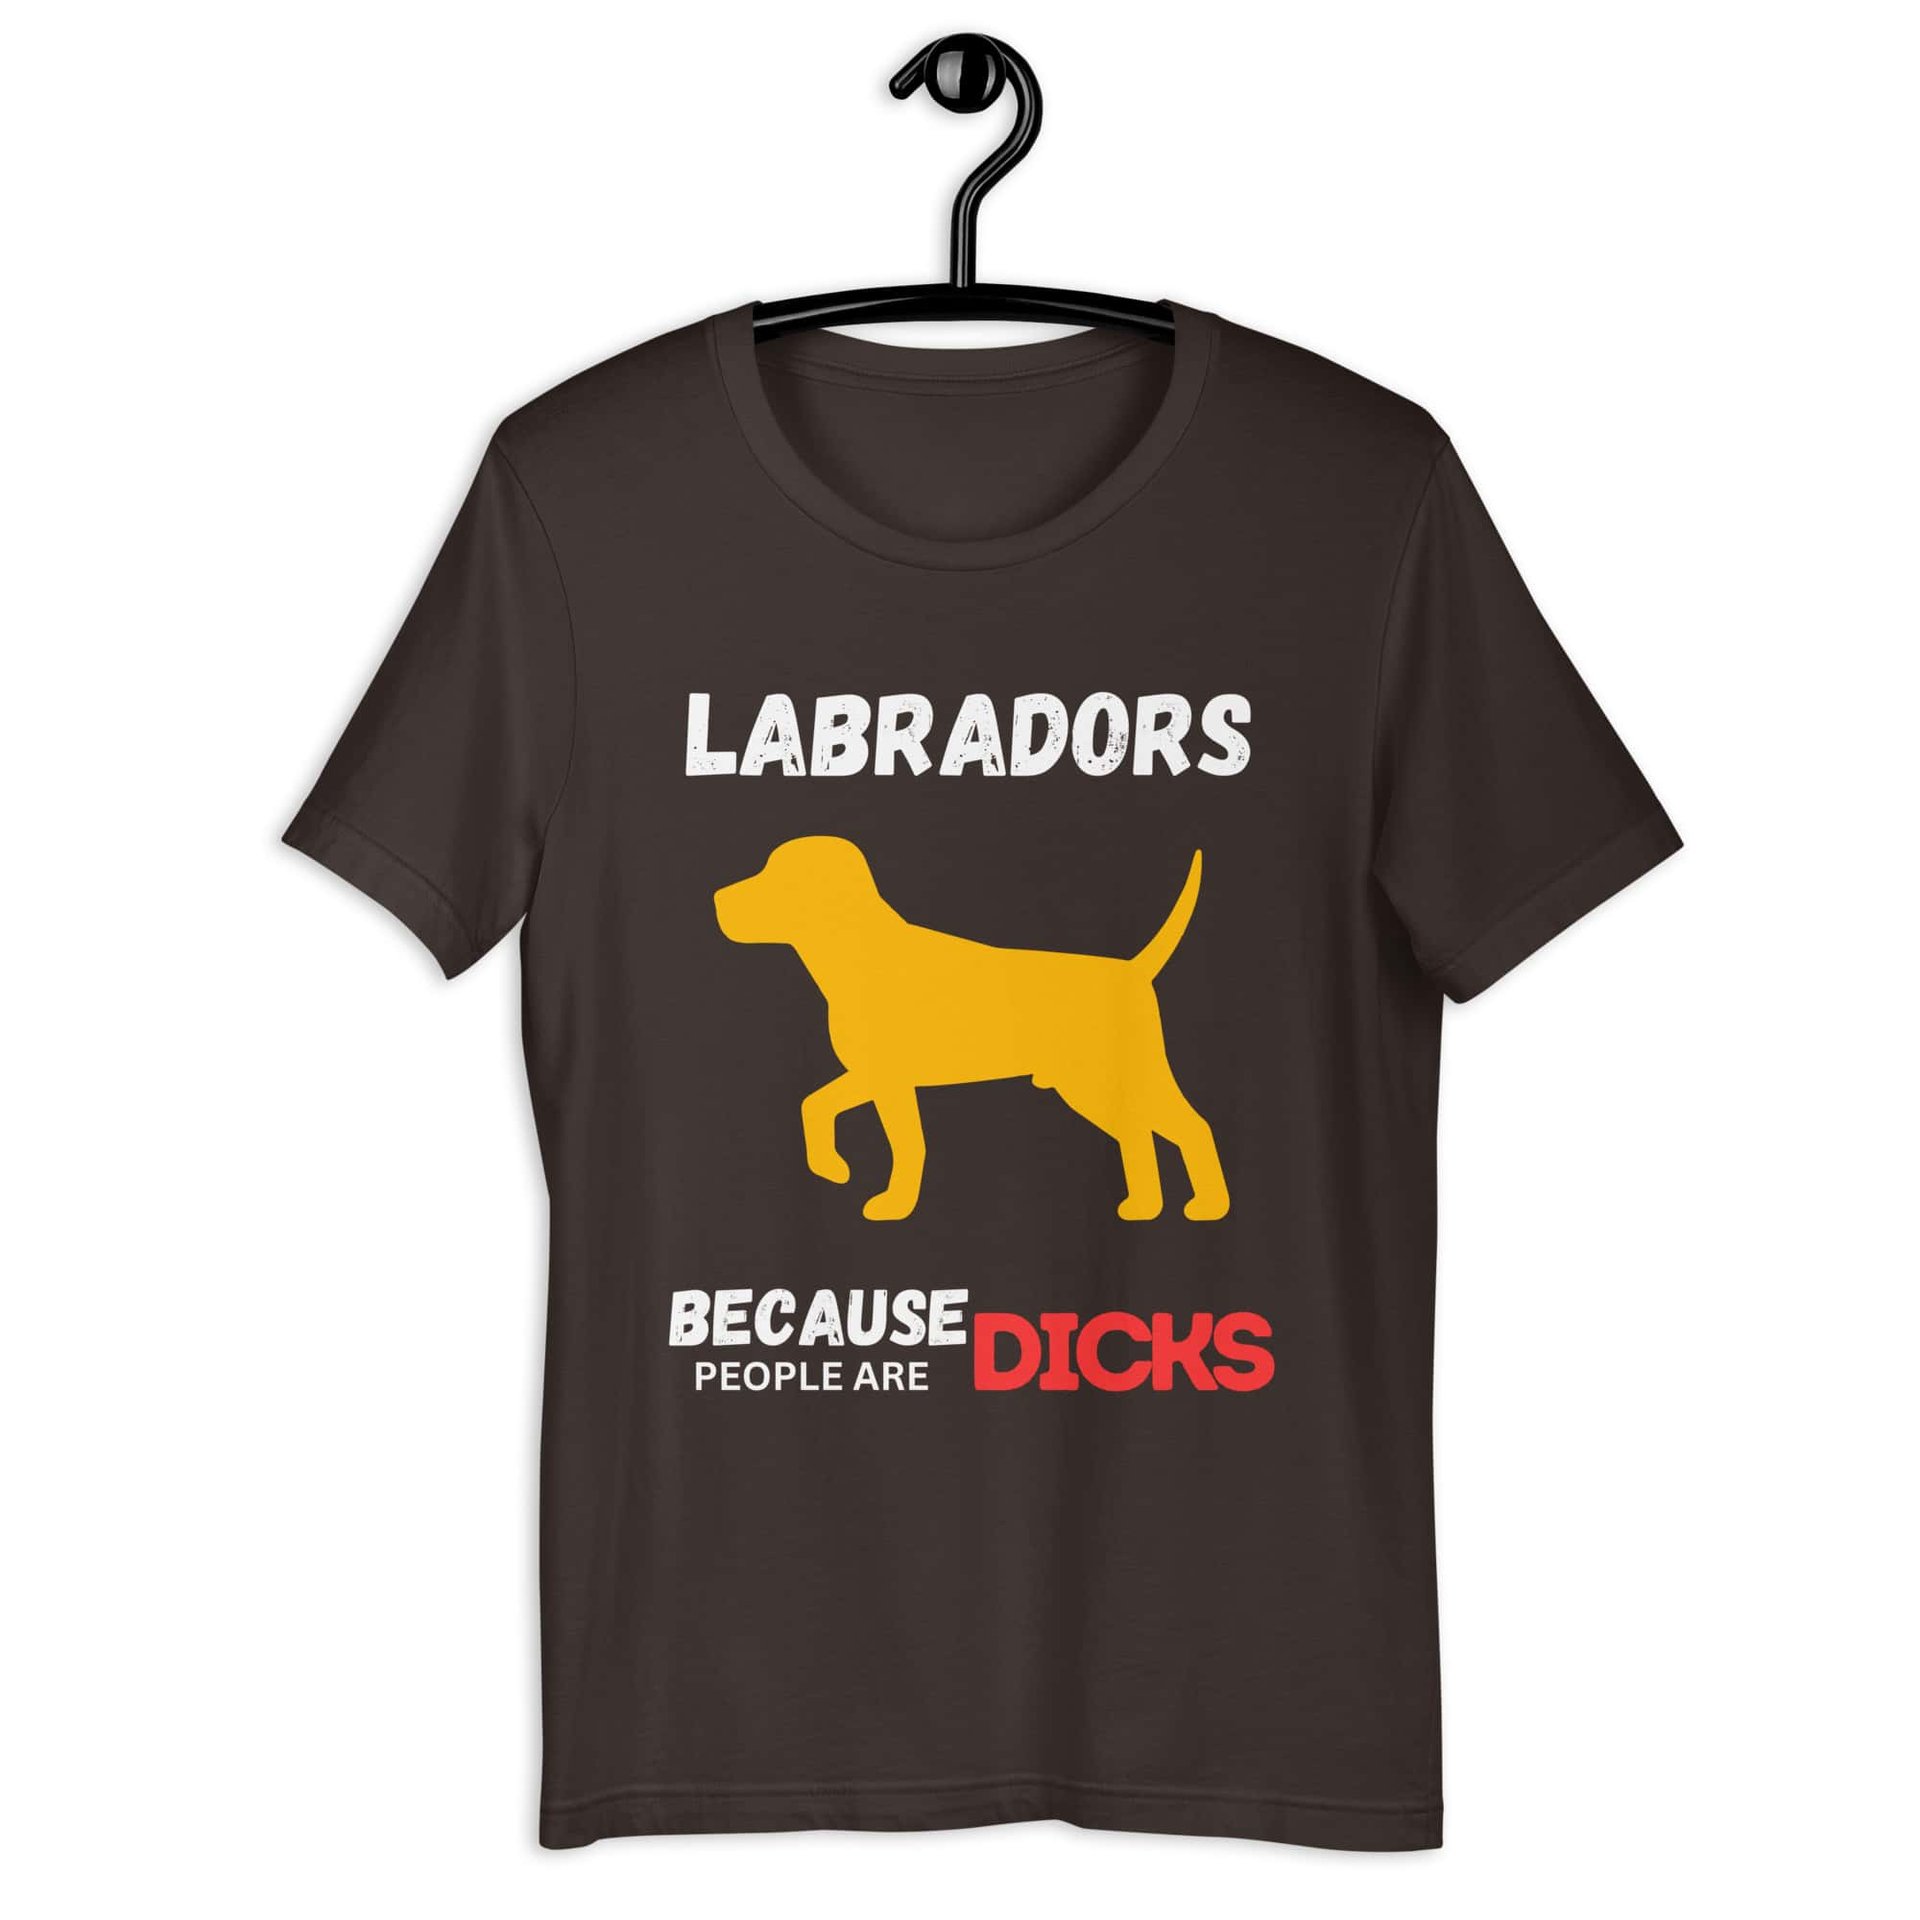 Labrador Because People Are Dicks Unisex T-Shirt Brown